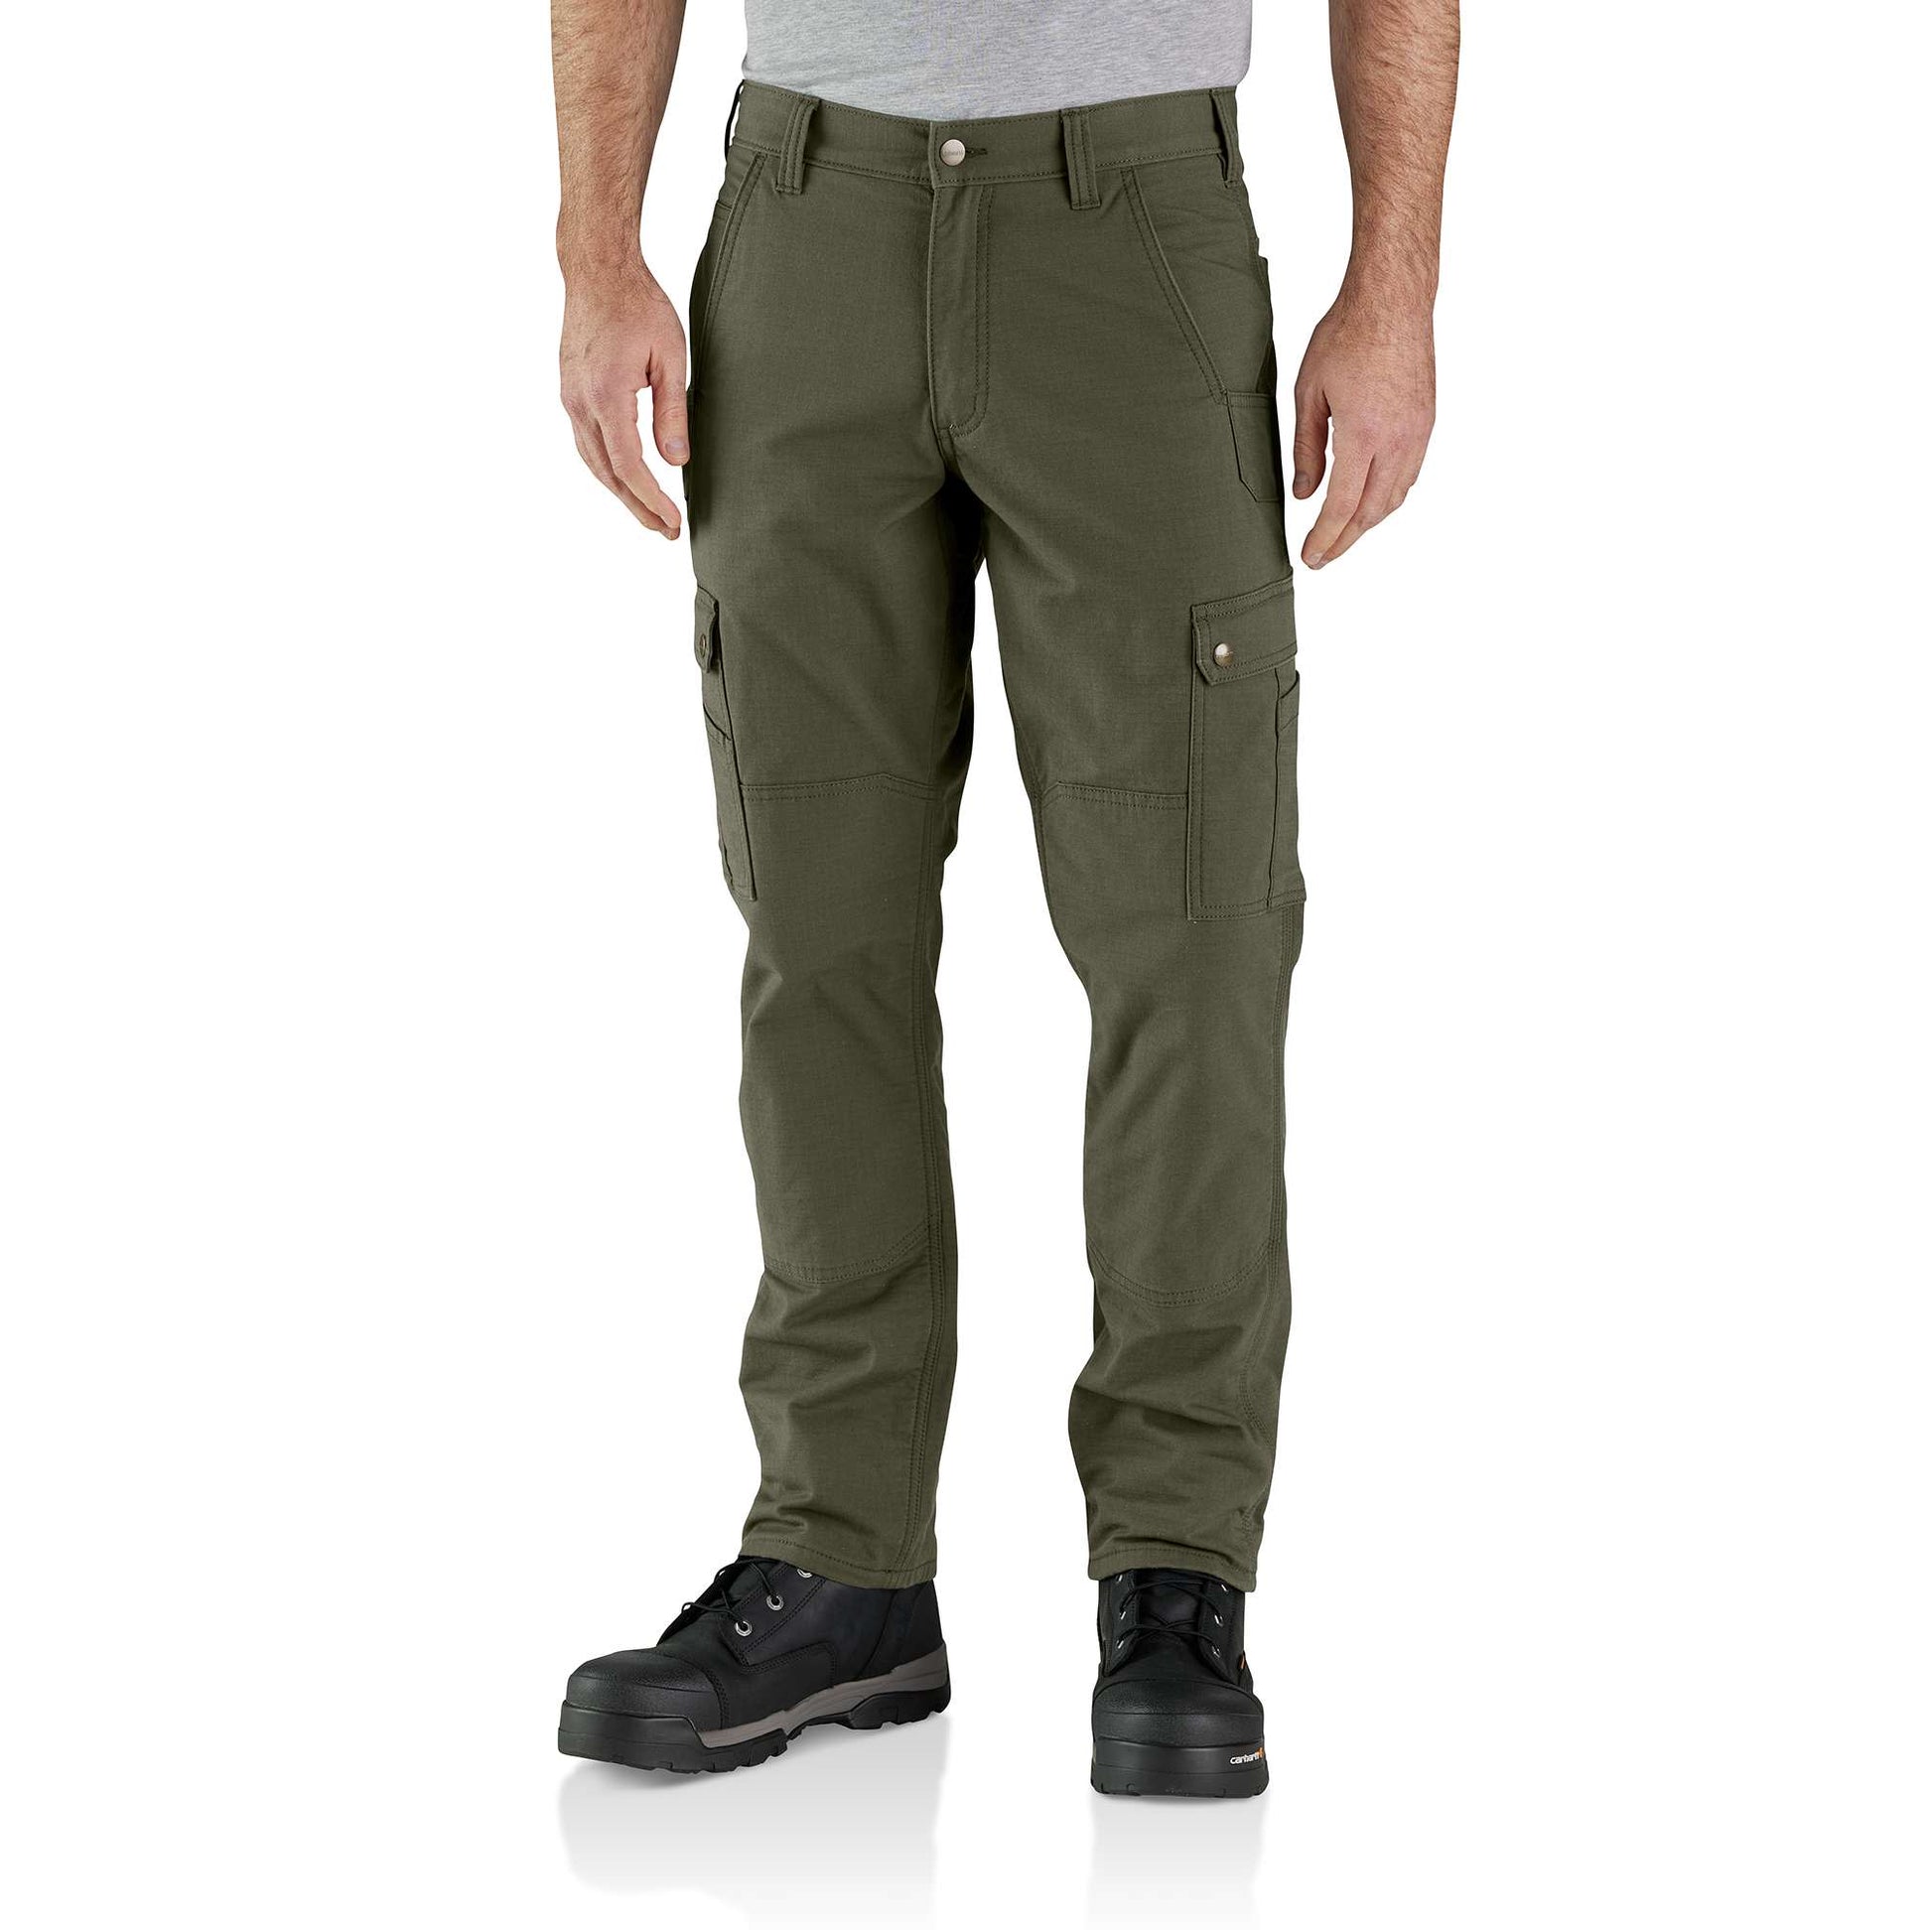 Stanley fleece lined cargo work pants what are you doing?taupe